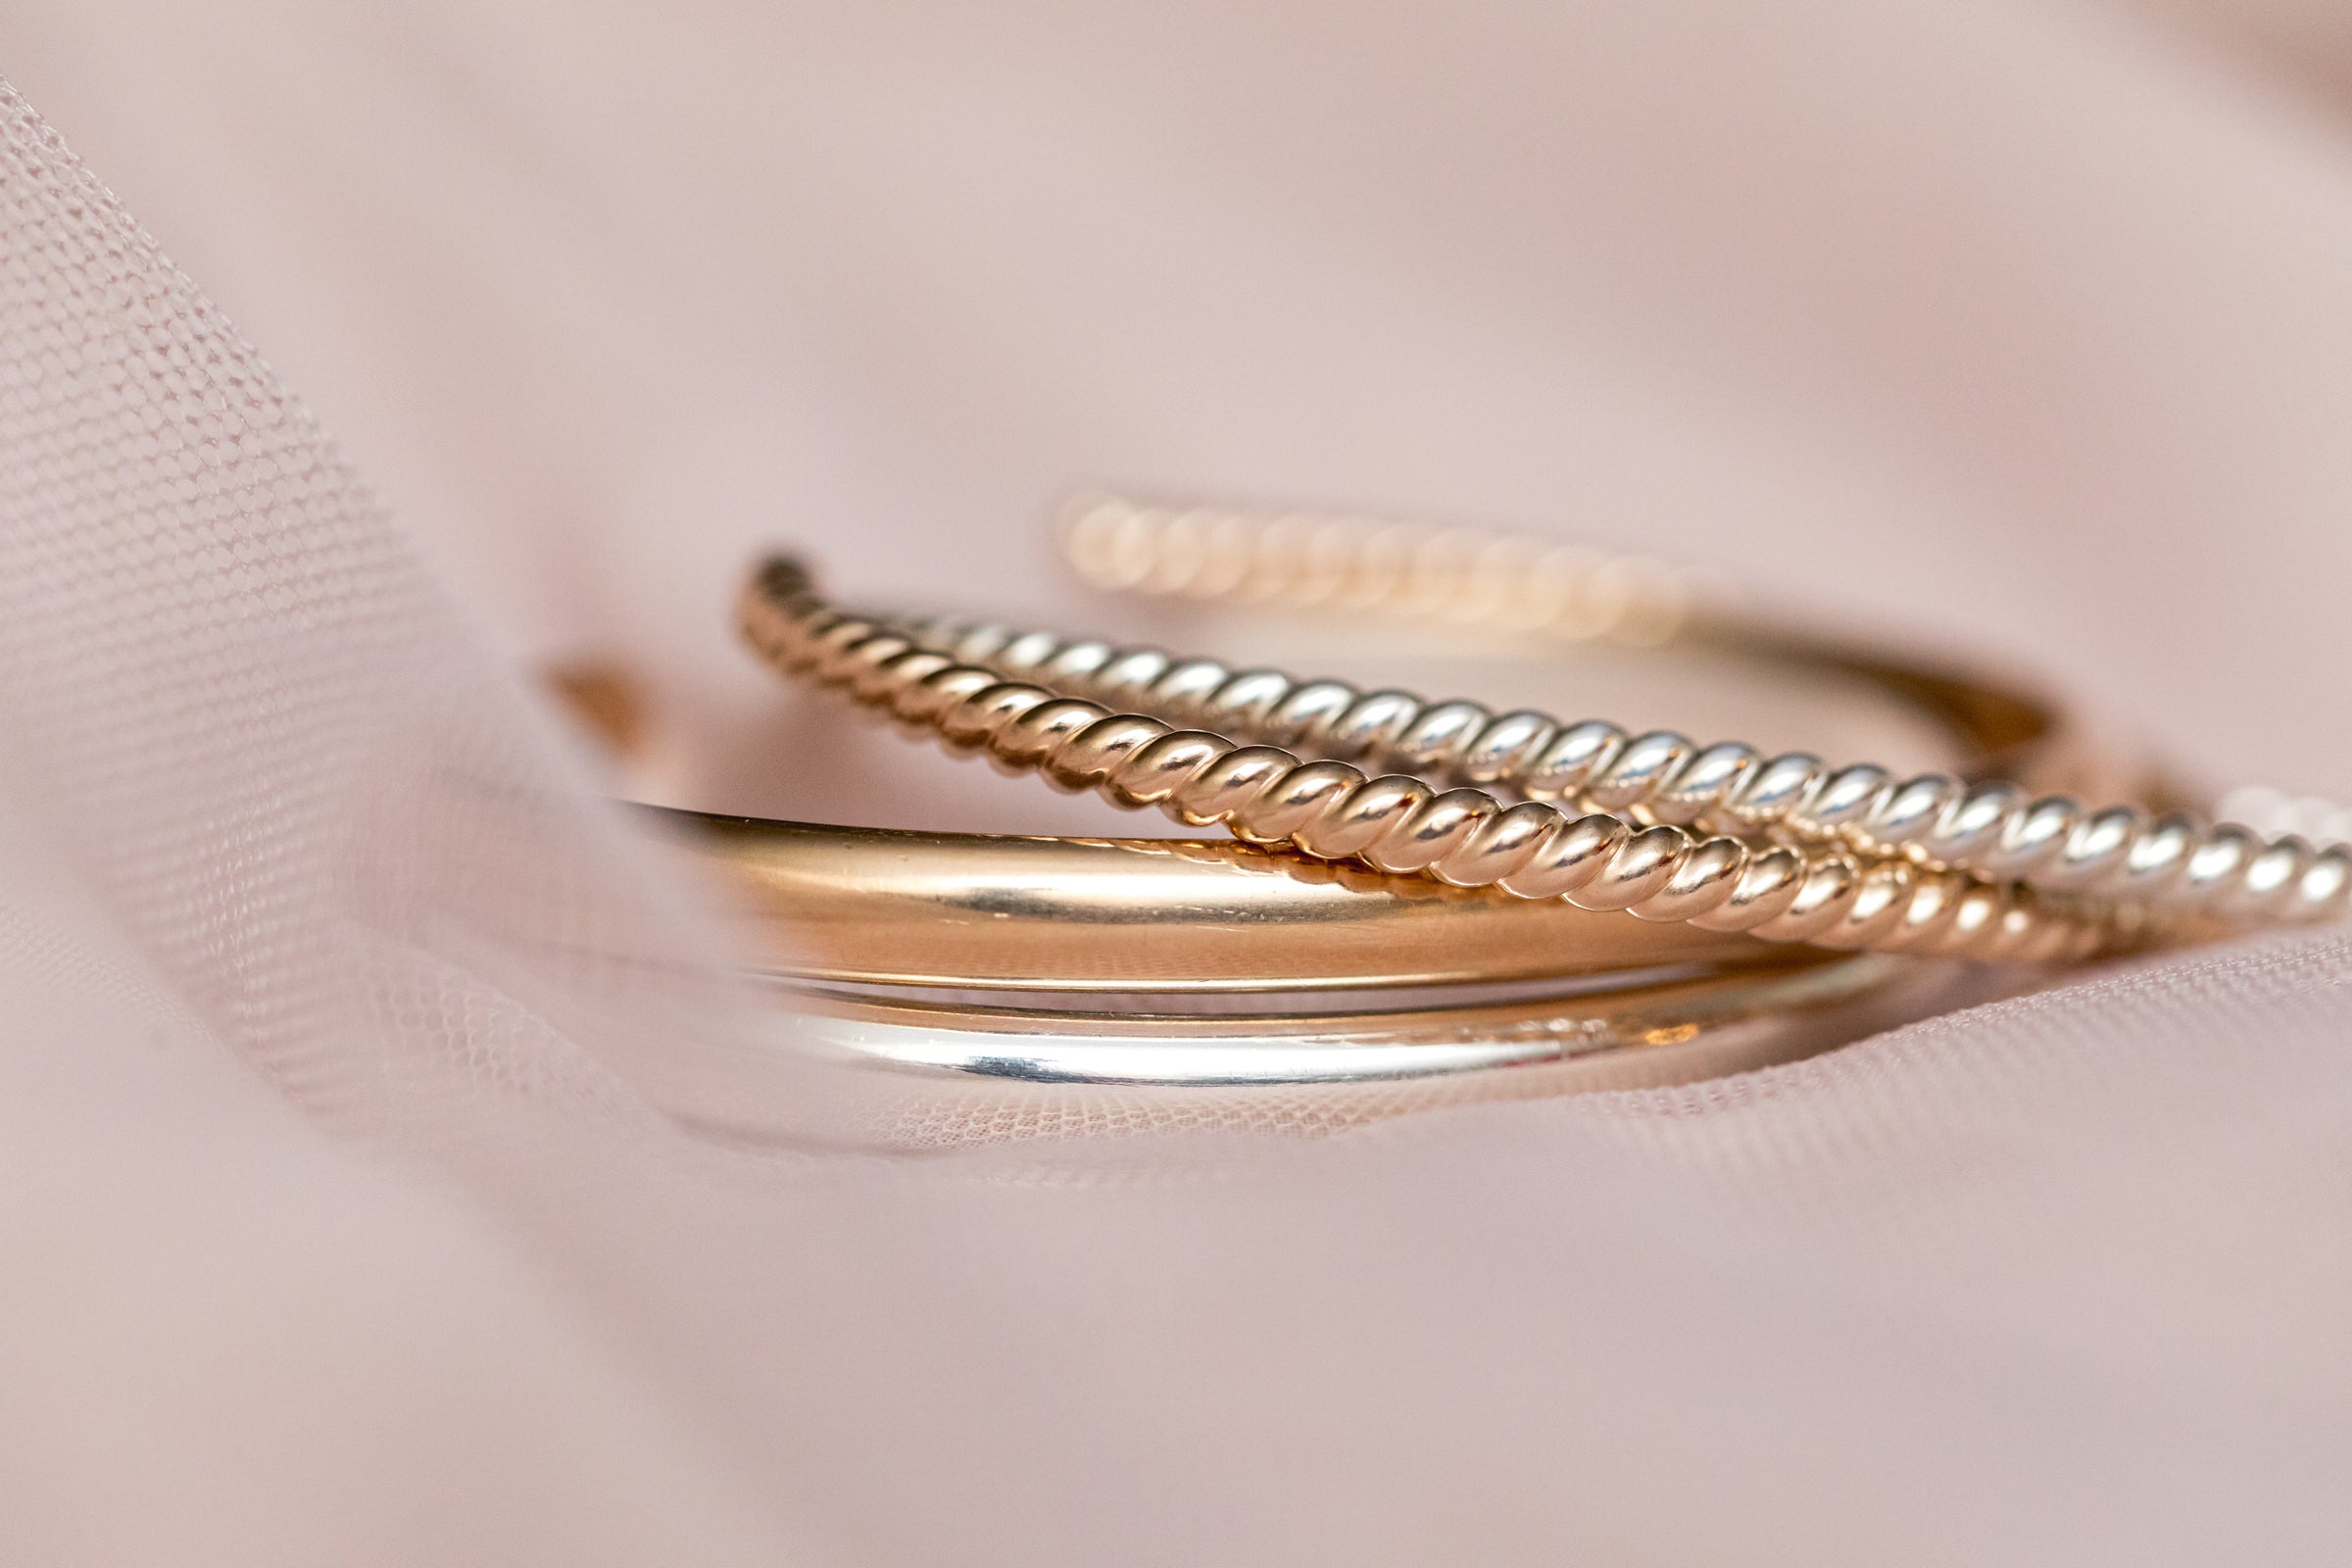 Gold and Silver Bangle Bracelet Gifts located in Lexington, Kentucky 